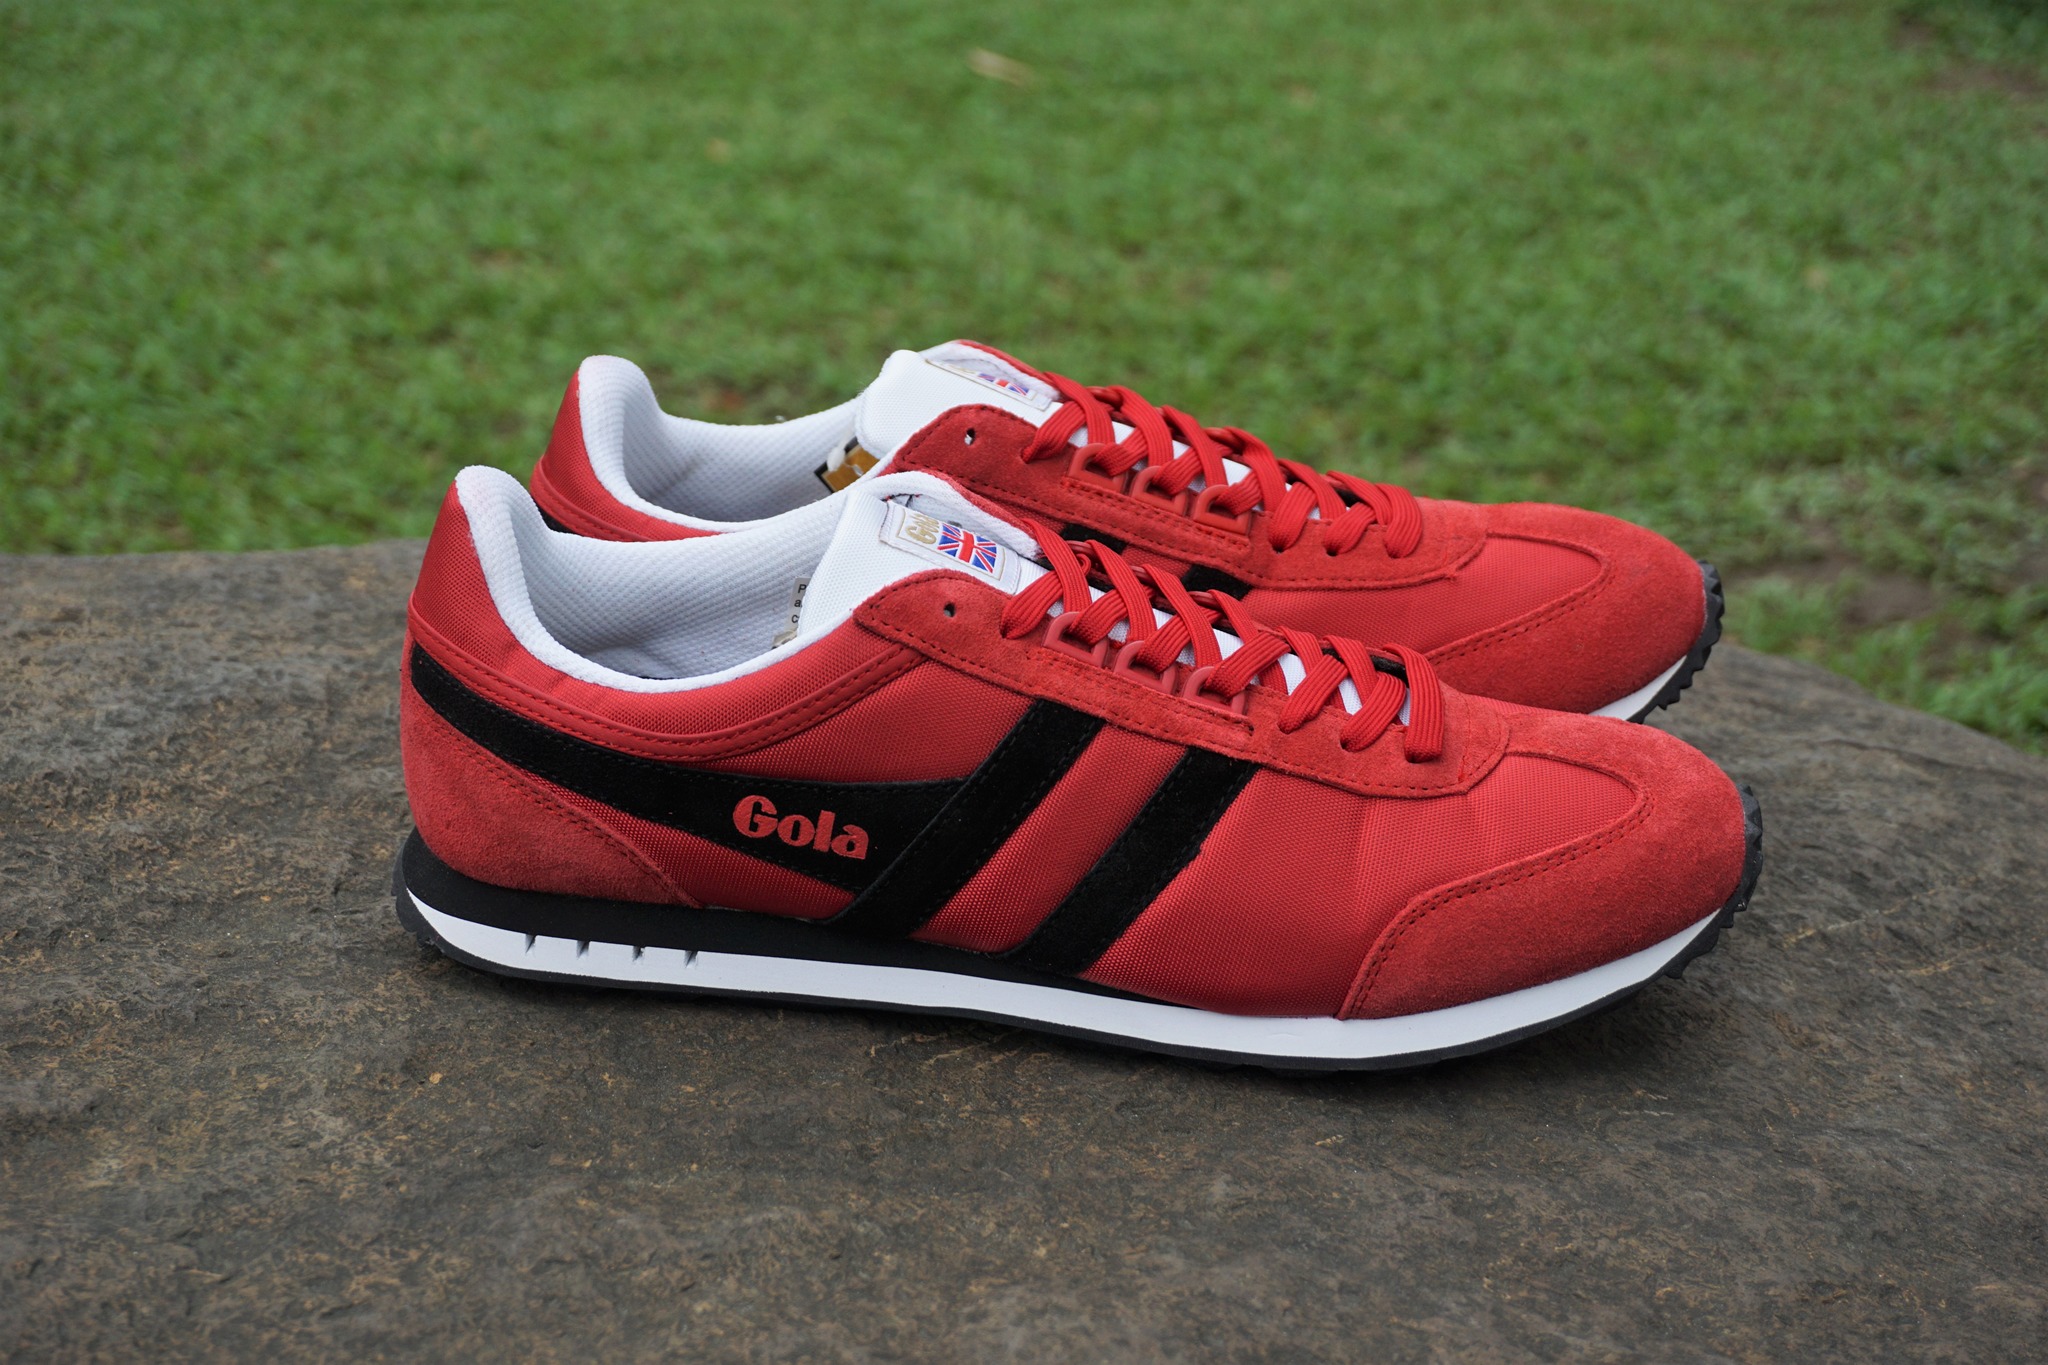 Gola Men’s Red Black Trainer Shoes (9) – Pinoy Guy Guide